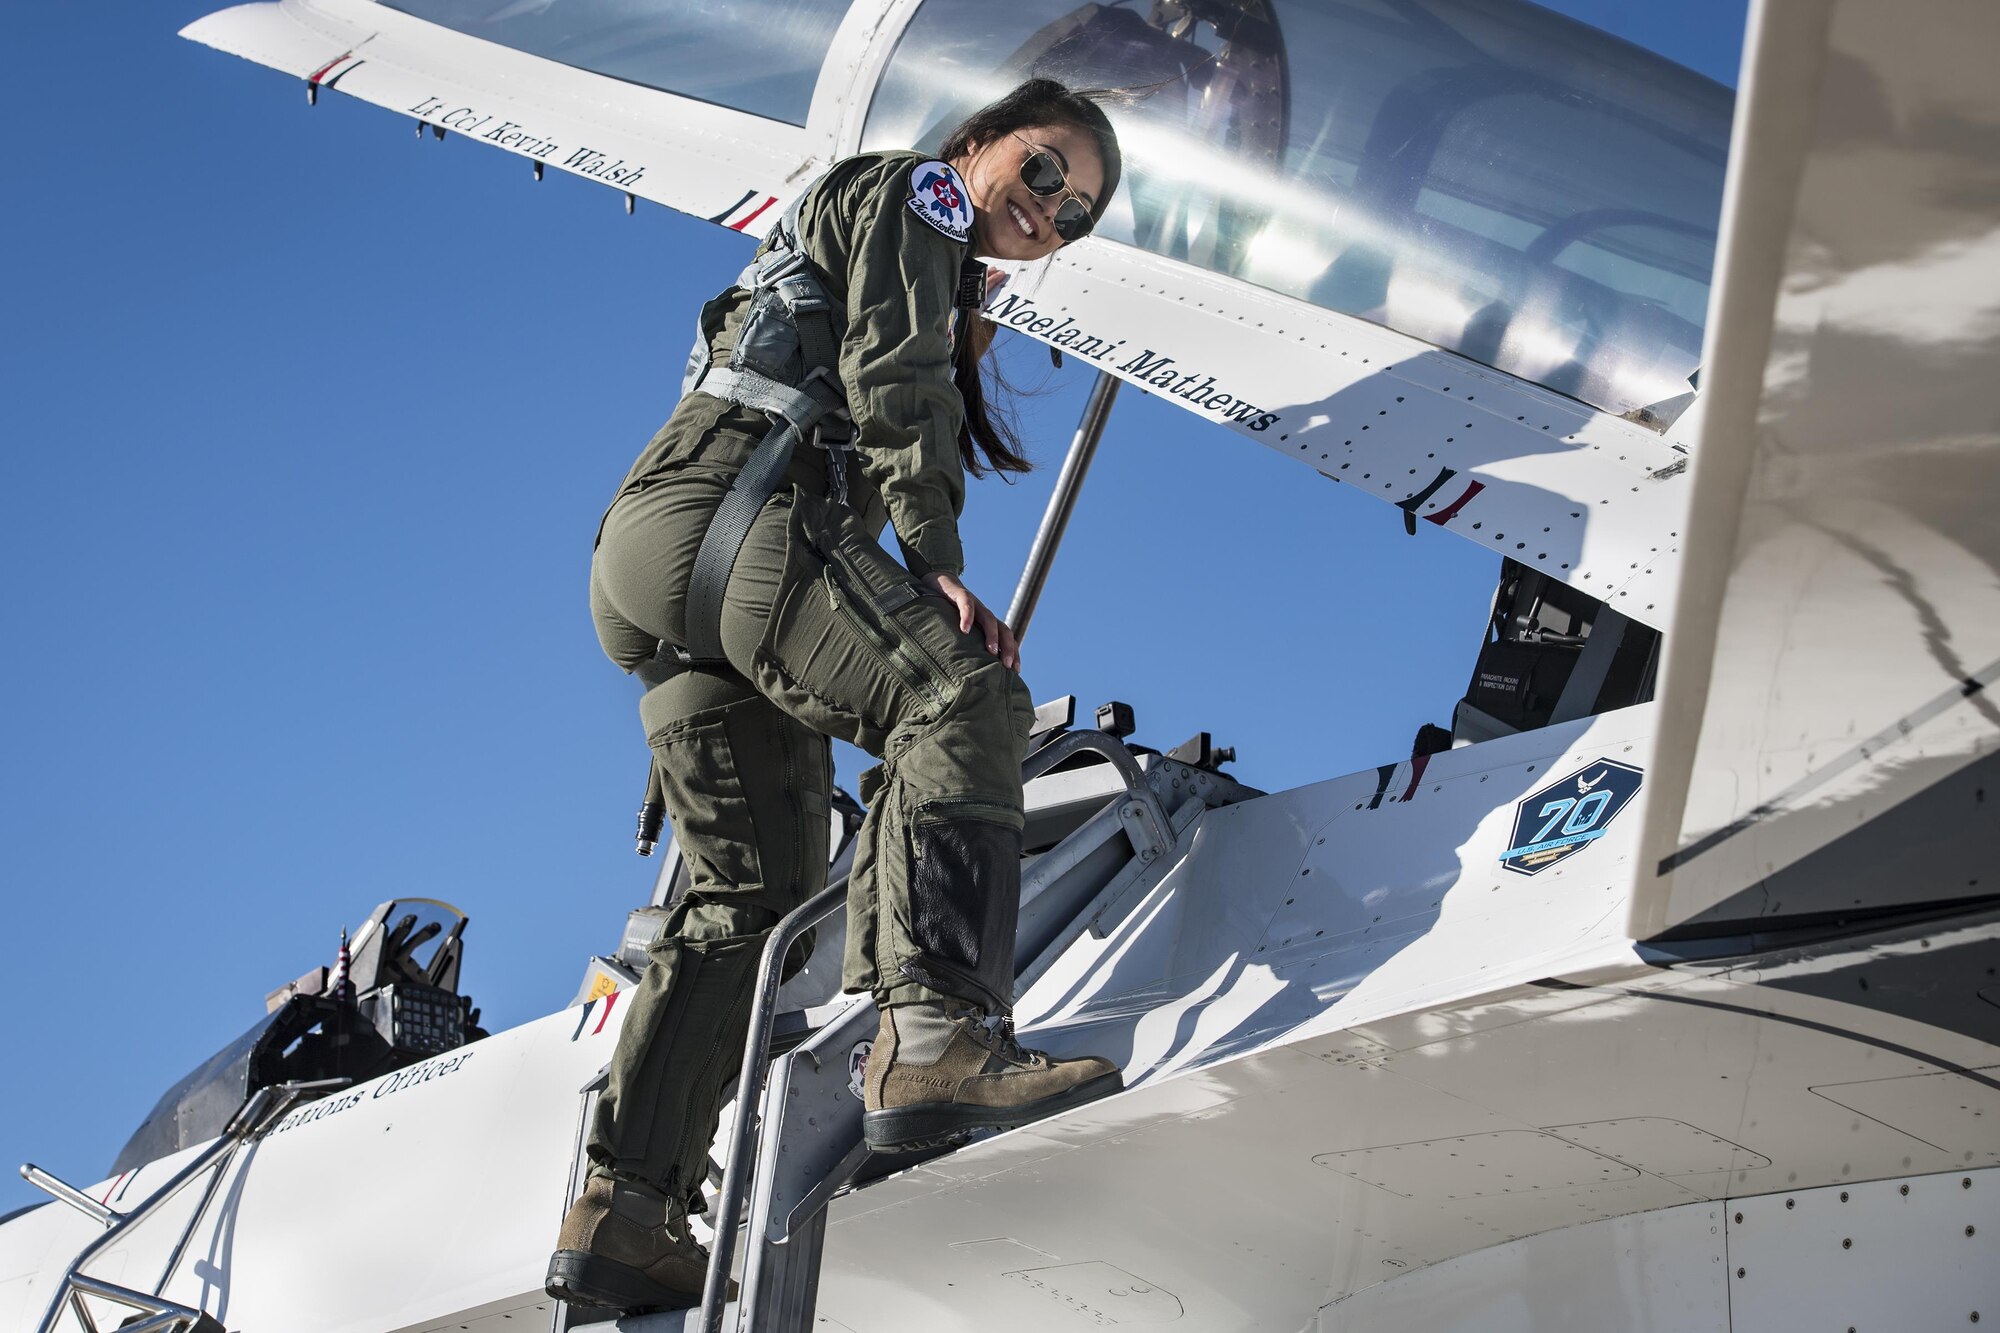 Noelani Mathews, multimedia journalist, poses before her media flight in an F-16D Fighting Falcon, Oct. 27, 2017, at Moody Air Force Base, Ga. The U.S. Air Force Thunderbirds, based out of Nellis Air Force Base, Nev., are the Air Force’s premier aerial demonstration team, performing at air shows and special events worldwide. (U.S. Air Force photo by Senior Airman Janiqua P. Robinson)